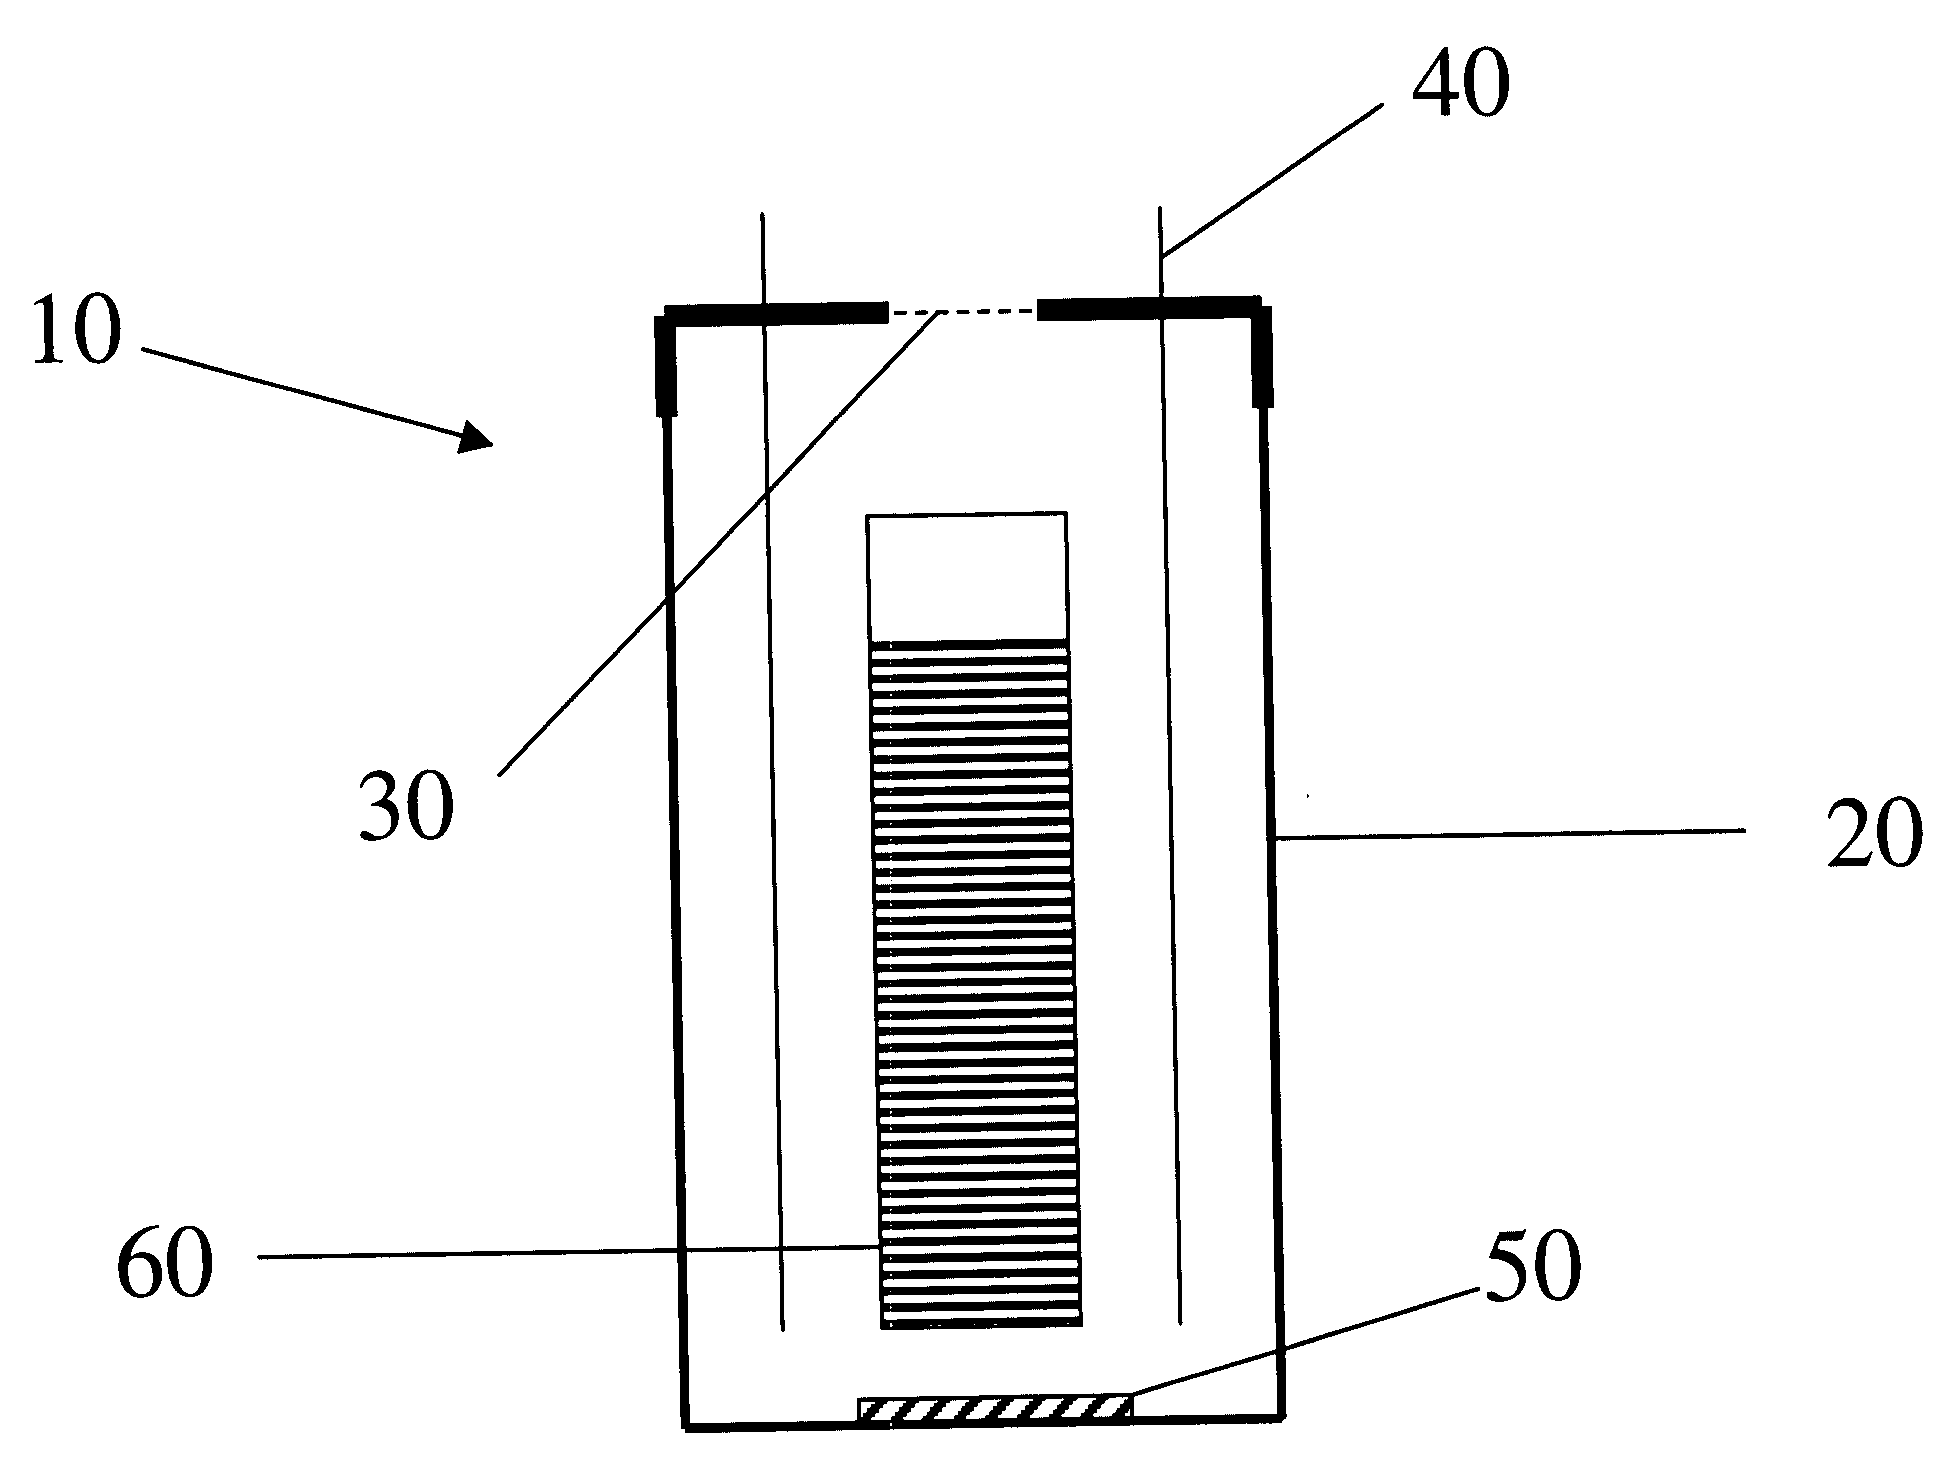 Device and method for rapidly determining the effectiveness of sterilization or disinfection processes